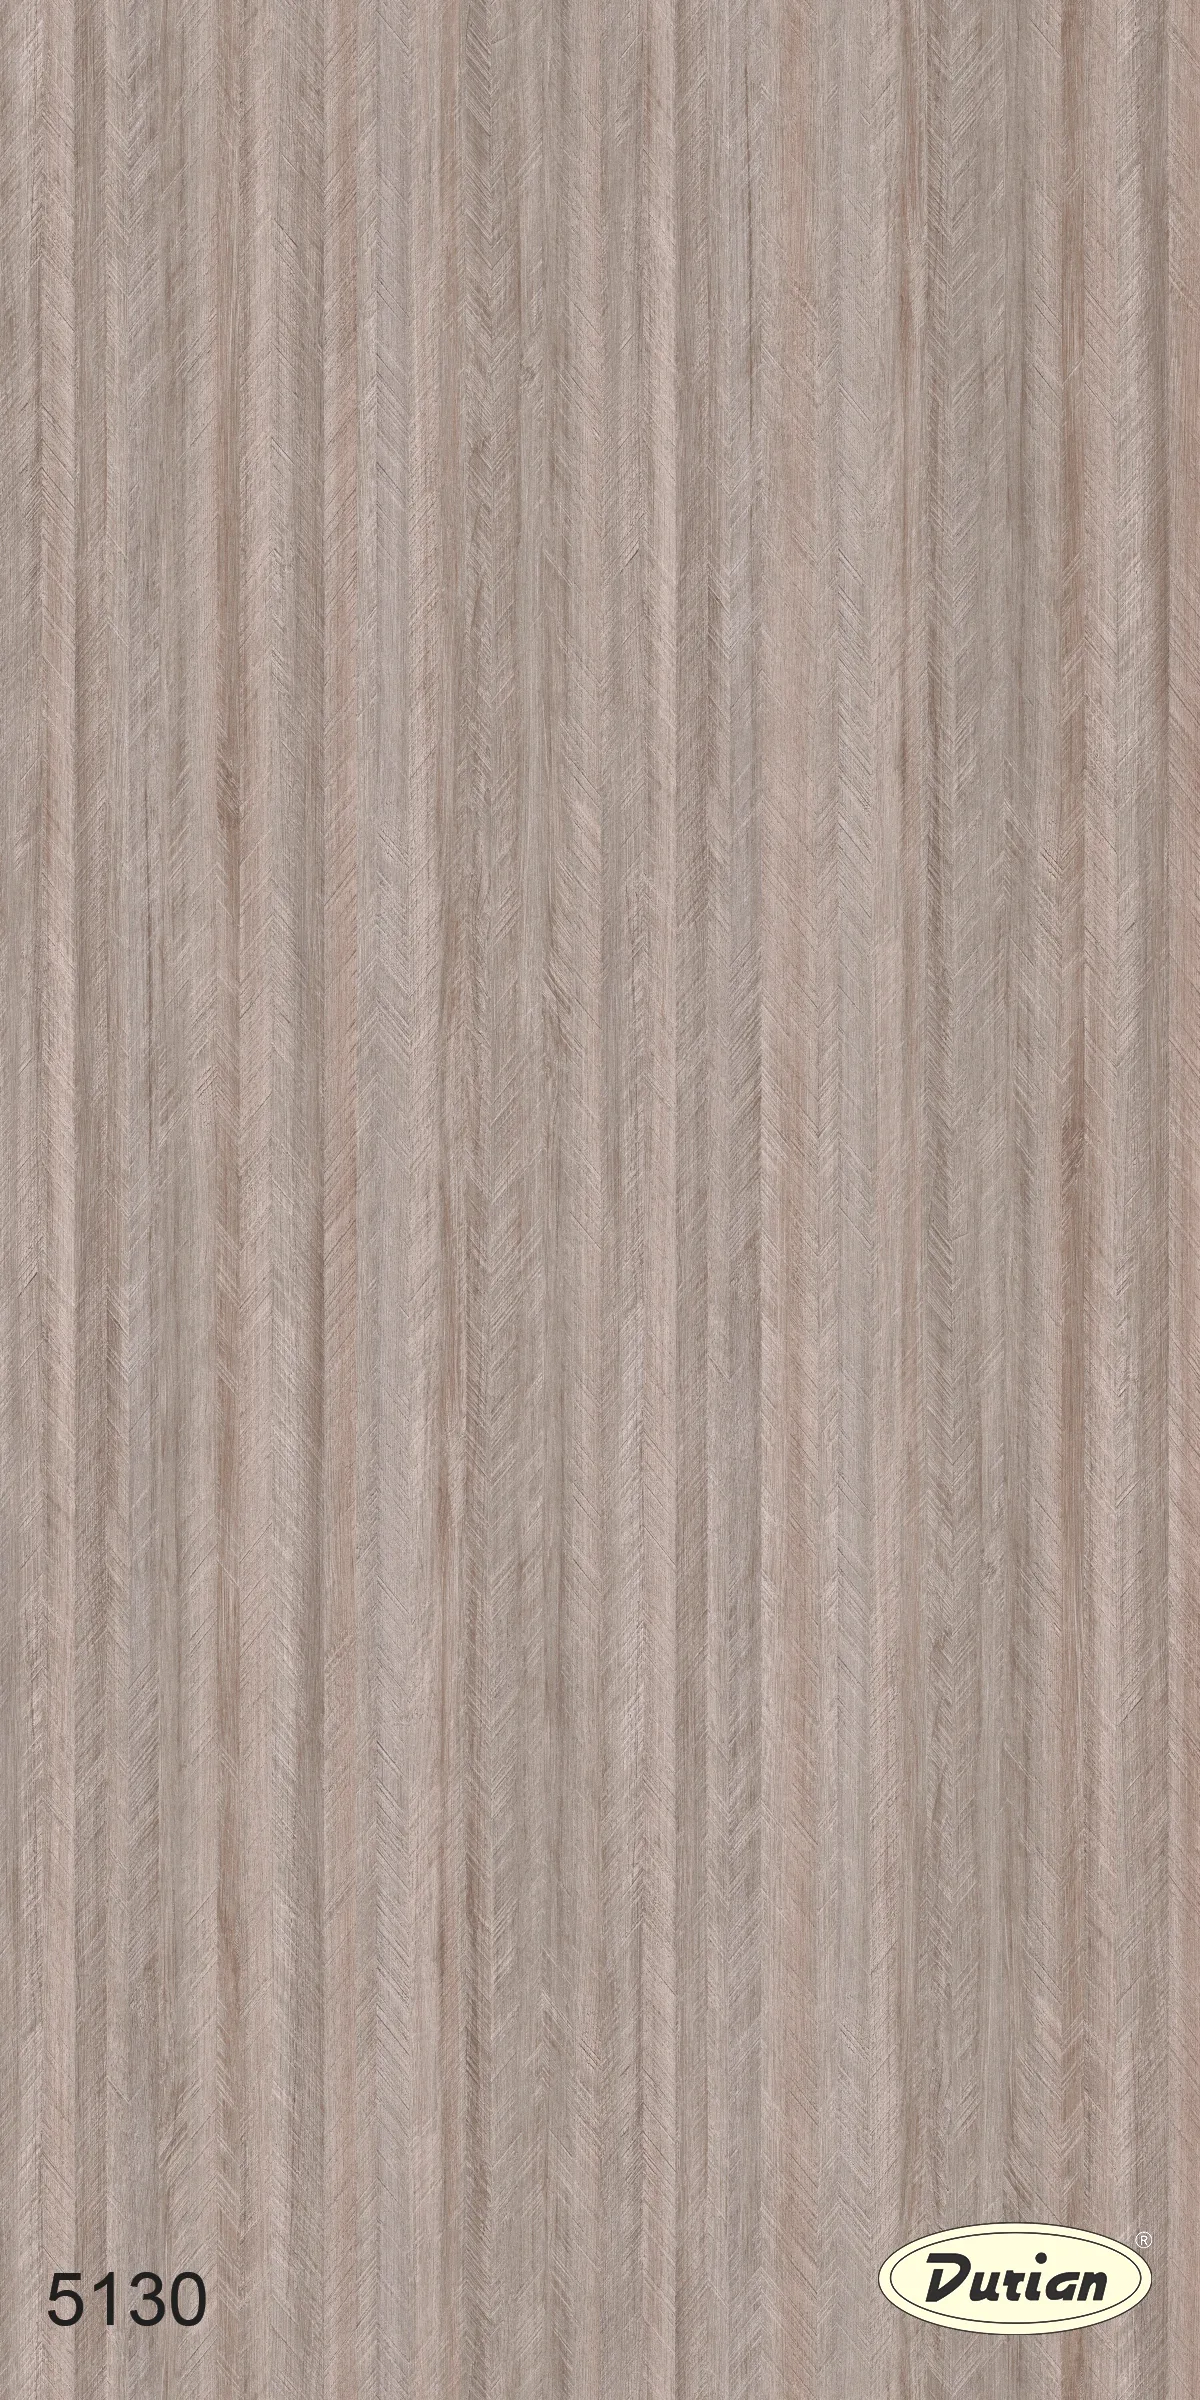 Durian 5130 ZK SP – VICTOR WOOD TAUPE